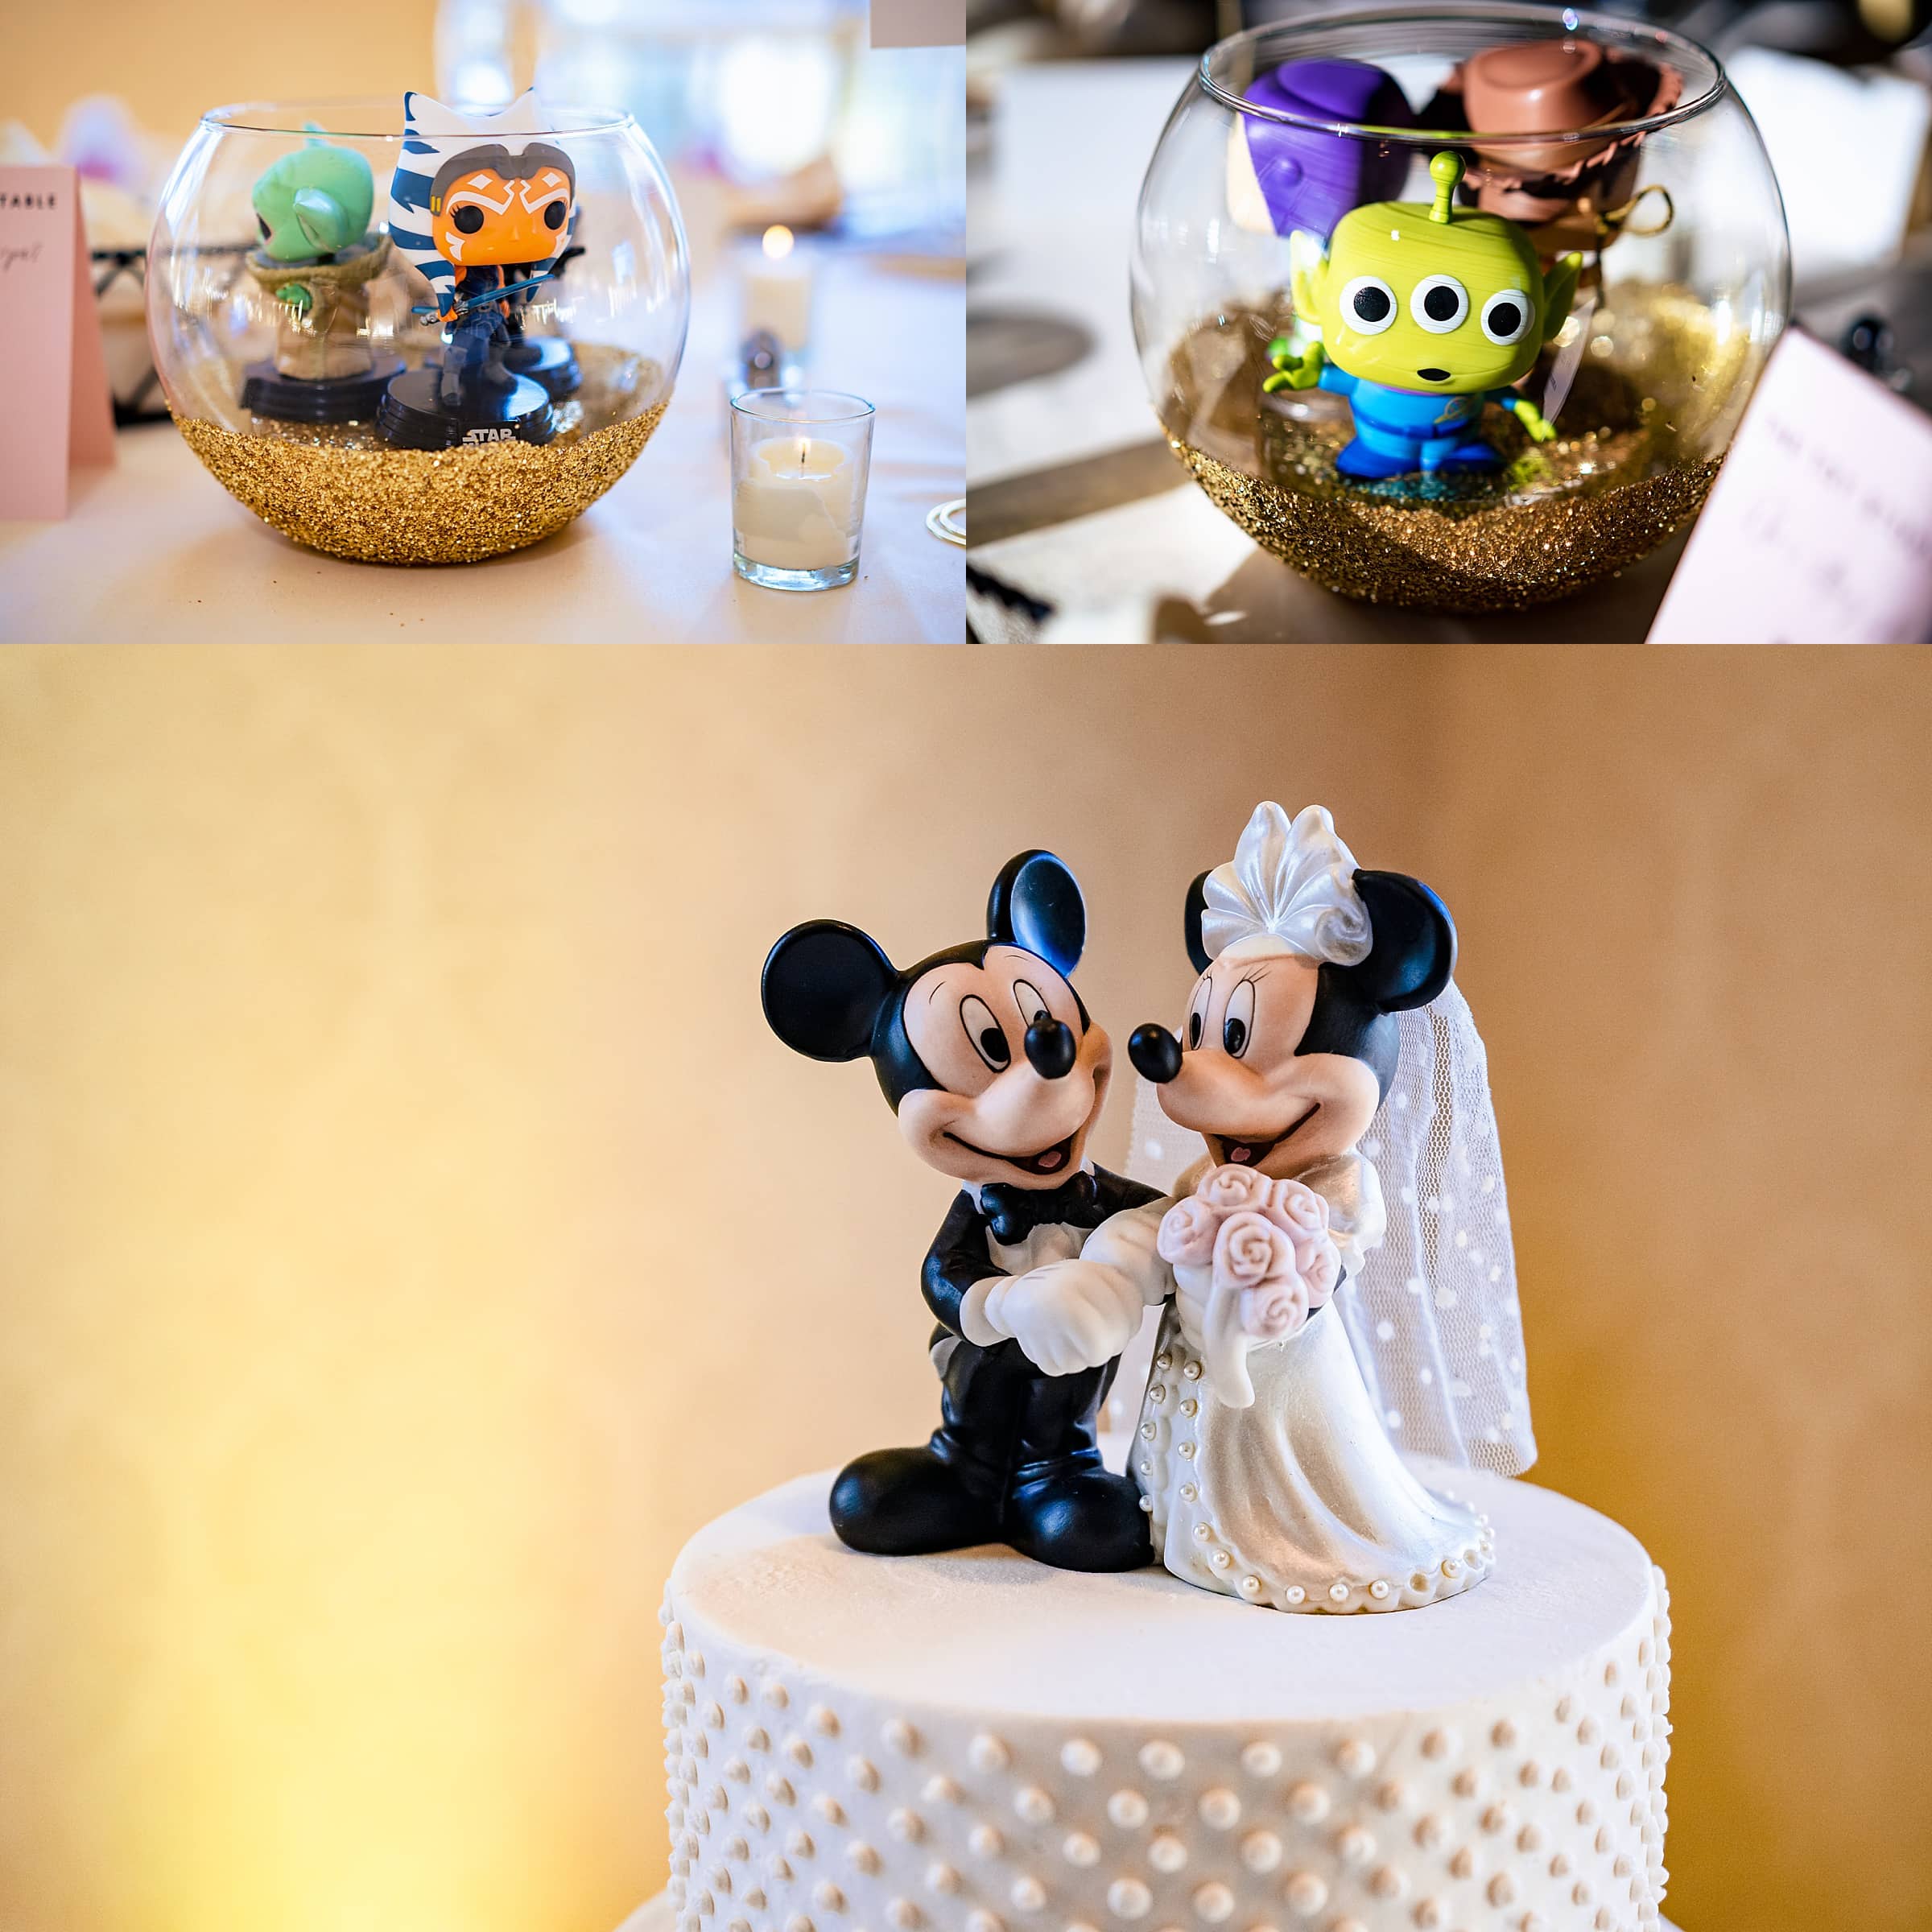 Nerdy wedding details including star wars, pixar, and disney characters as centerpieces and a cake topper | photos by Kivus & Camera